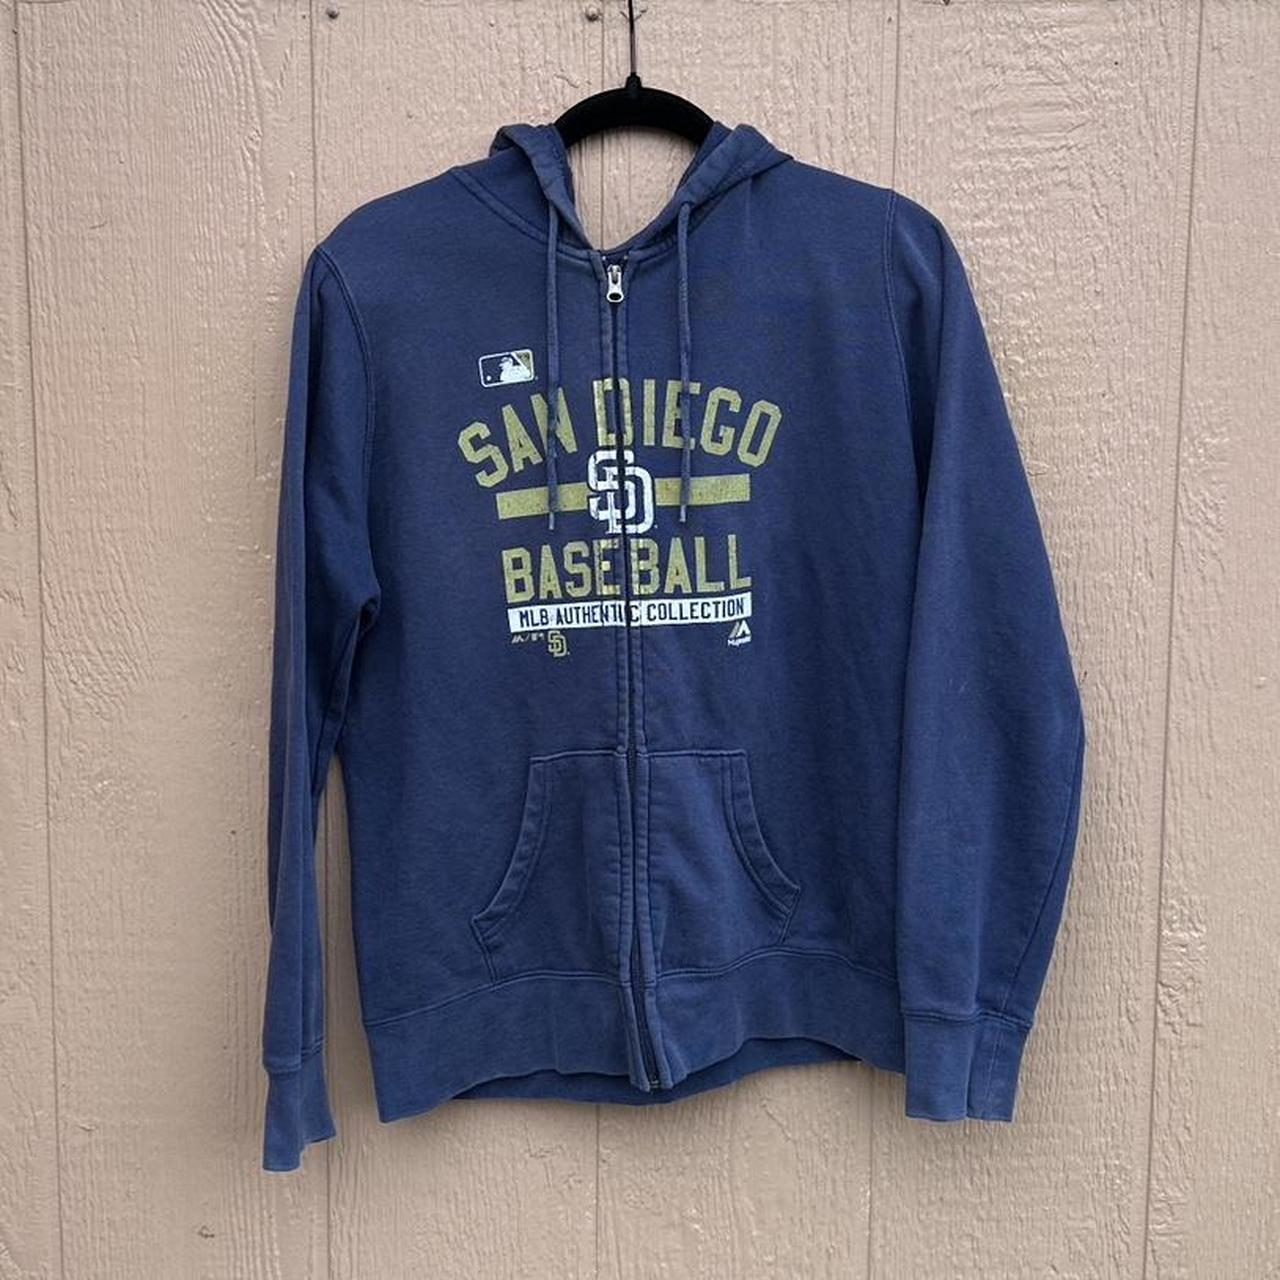 Men's Majestic Navy/White San Diego Padres Authentic Collection On